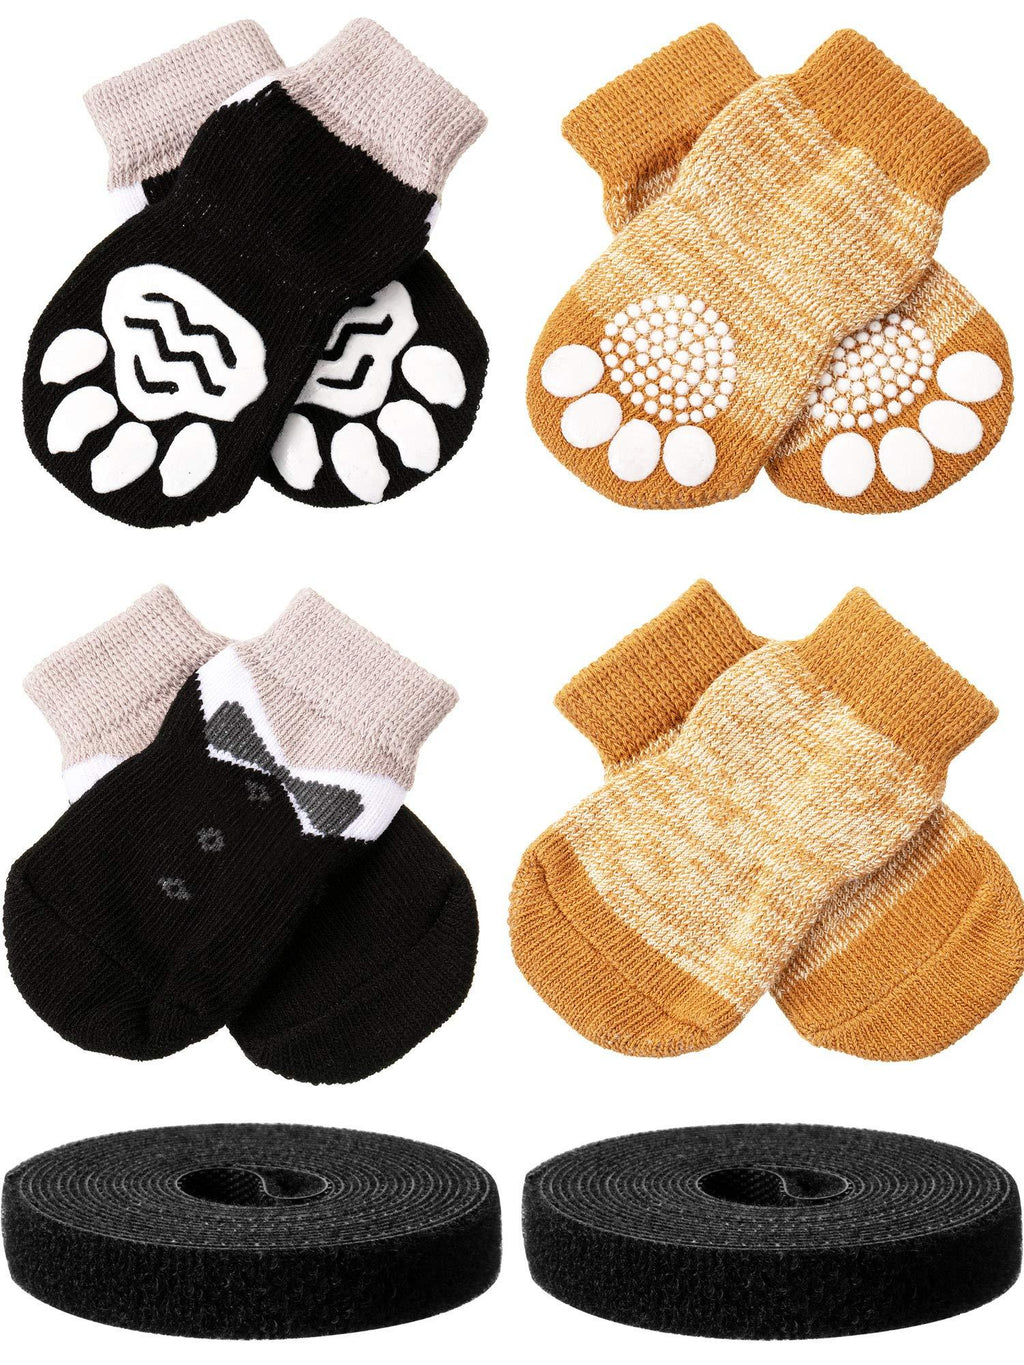 [Australia] - 16 Pieces Anti-Slip Pet Socks Dog Socks Pet Paw Protectors Traction Control for Small Breed Dogs Indoor Wear with 2 Rolls Grips 